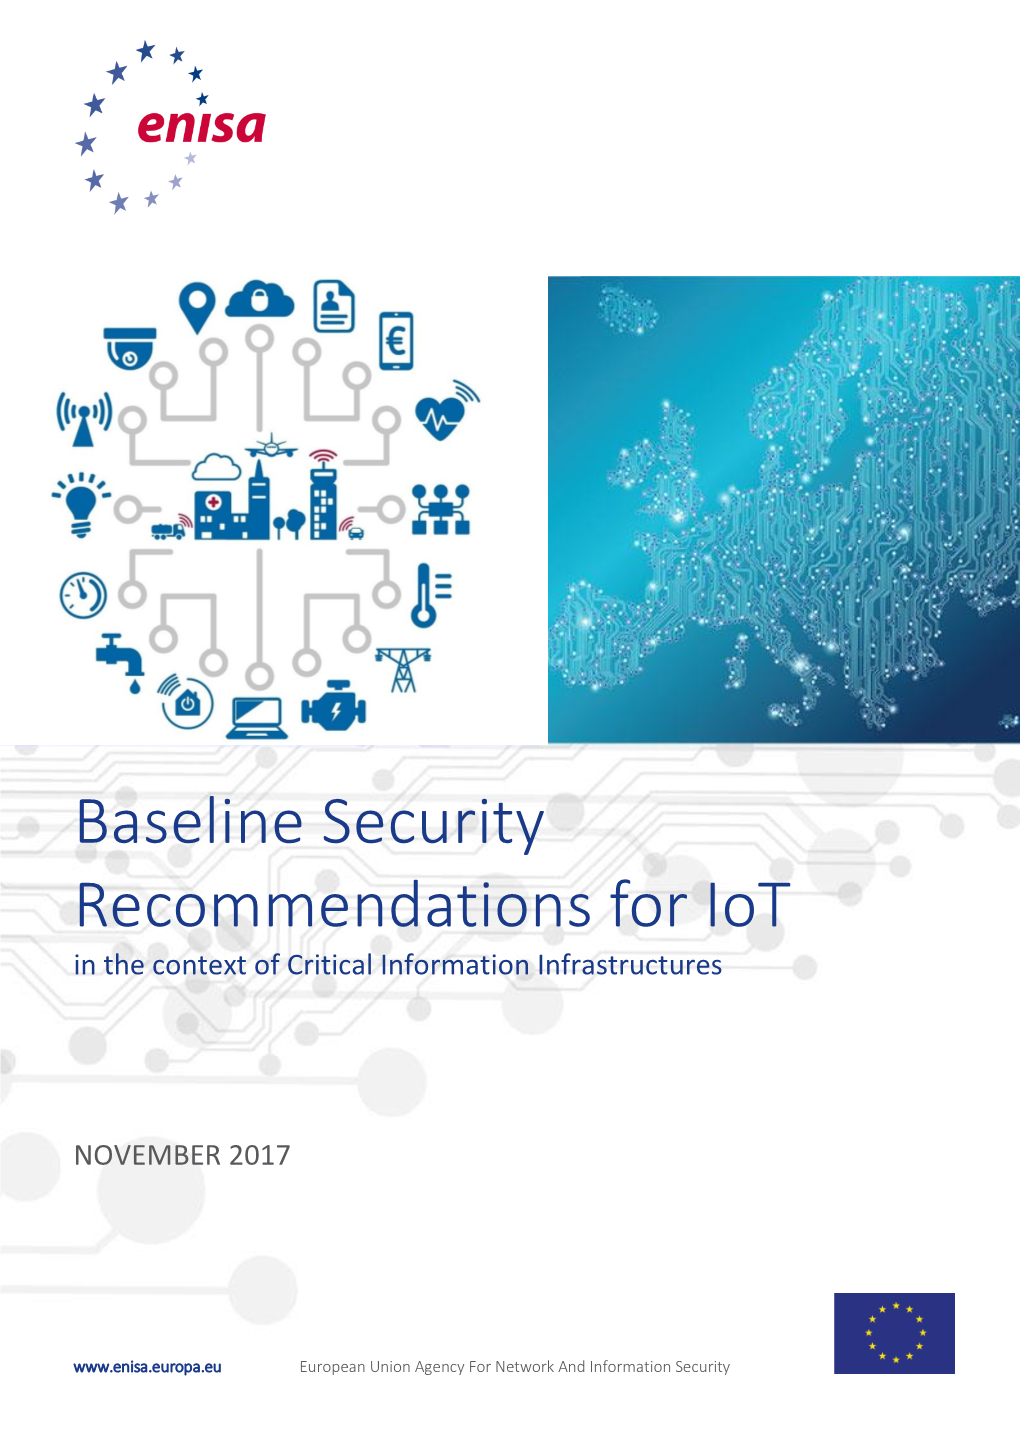 Baseline Security Recommendations for Iot in the Context of Critical Information Infrastructures